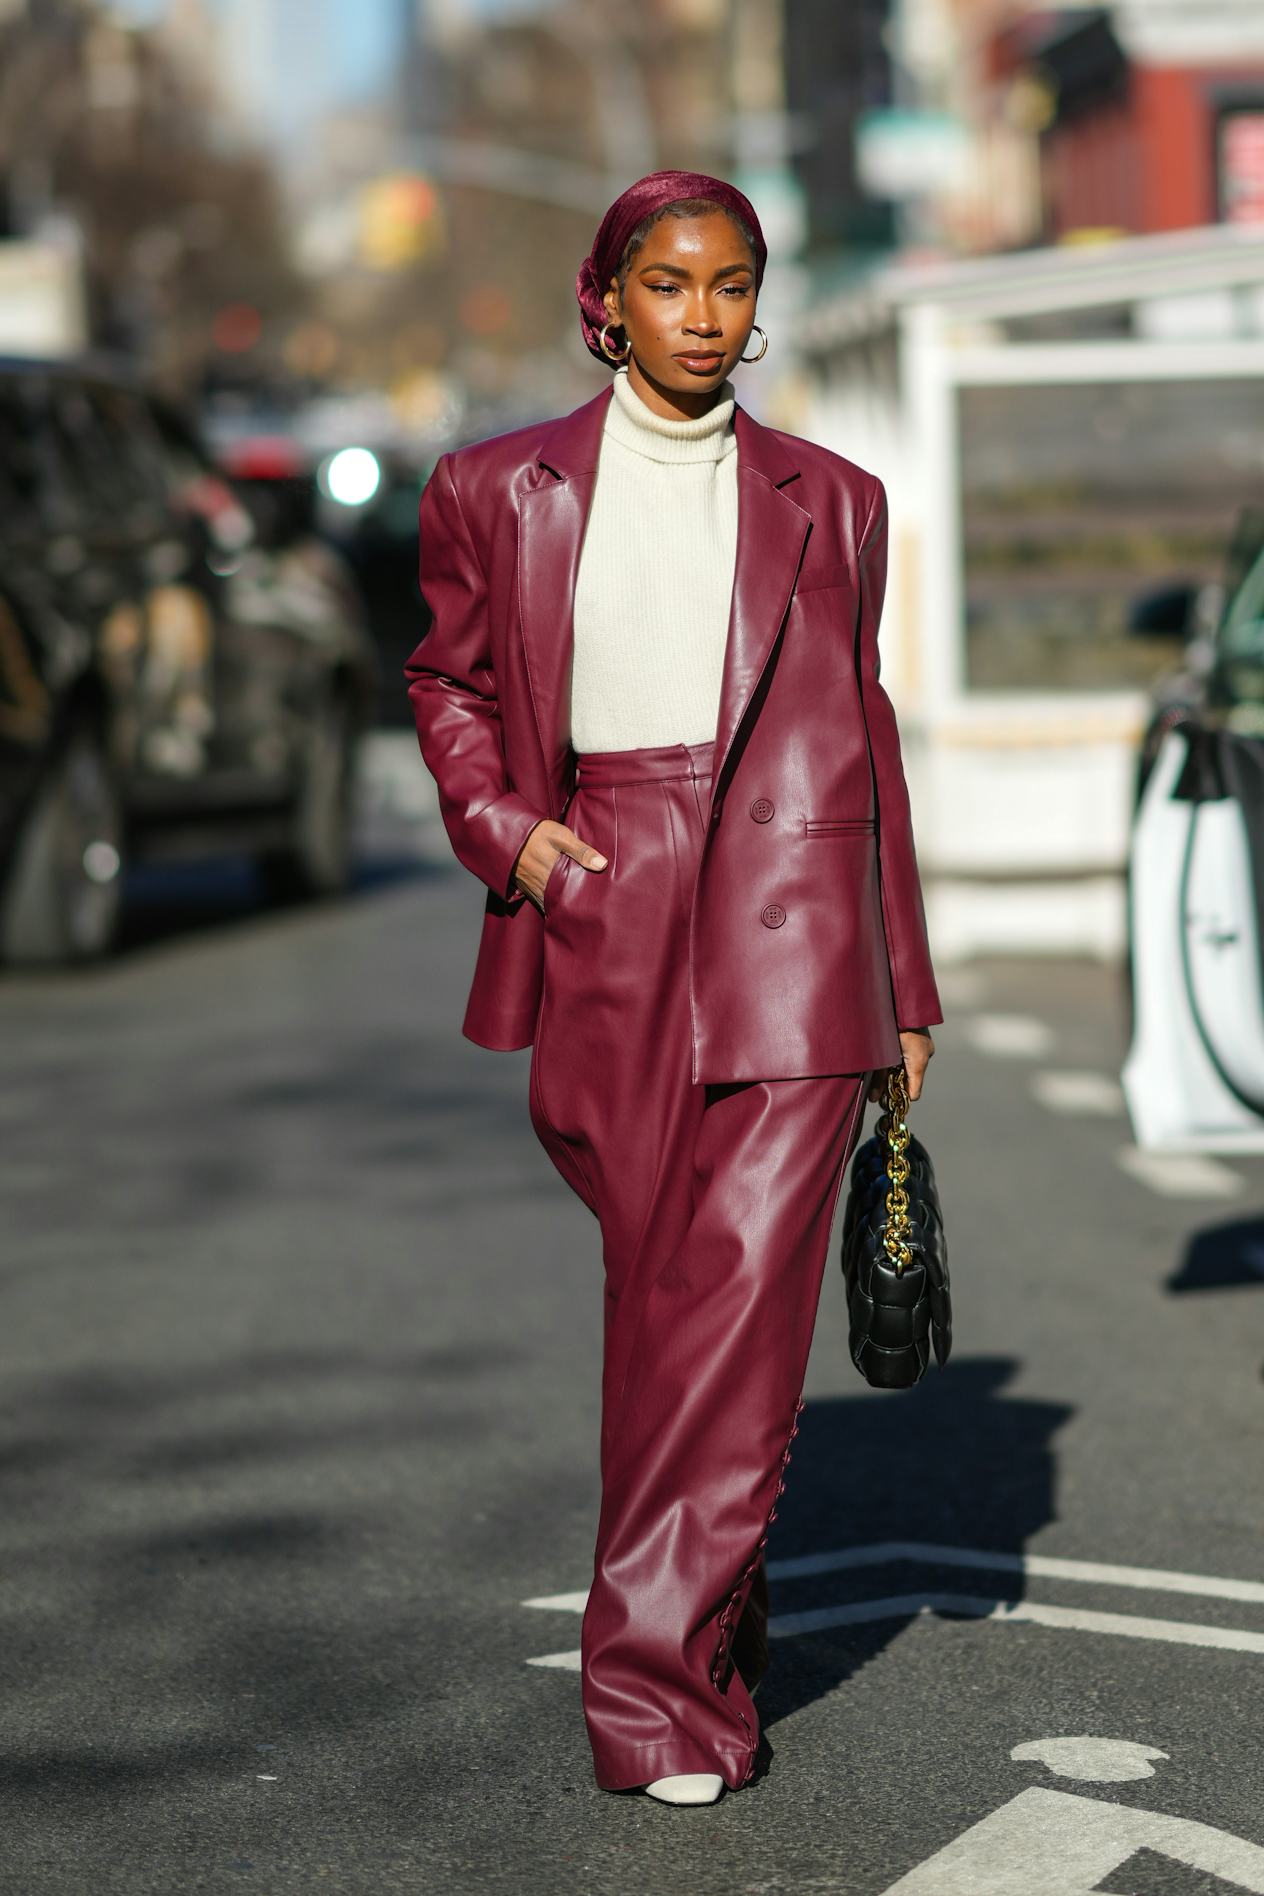 The Best Street Style Looks From New York Fashion Week Fall 2022